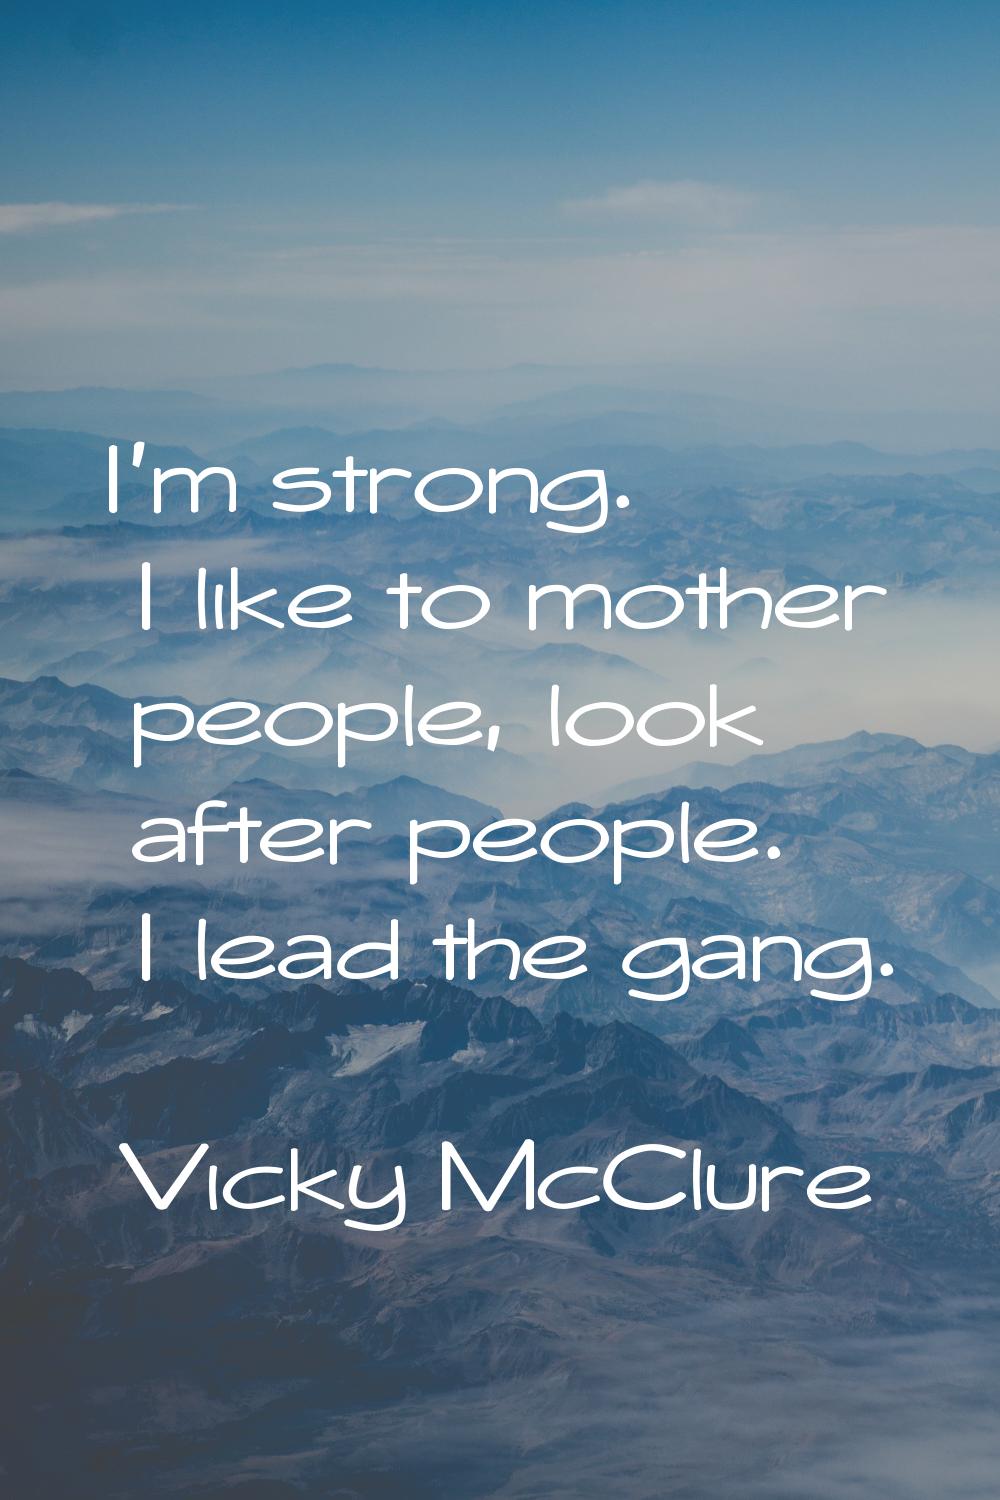 I'm strong. I like to mother people, look after people. I lead the gang.